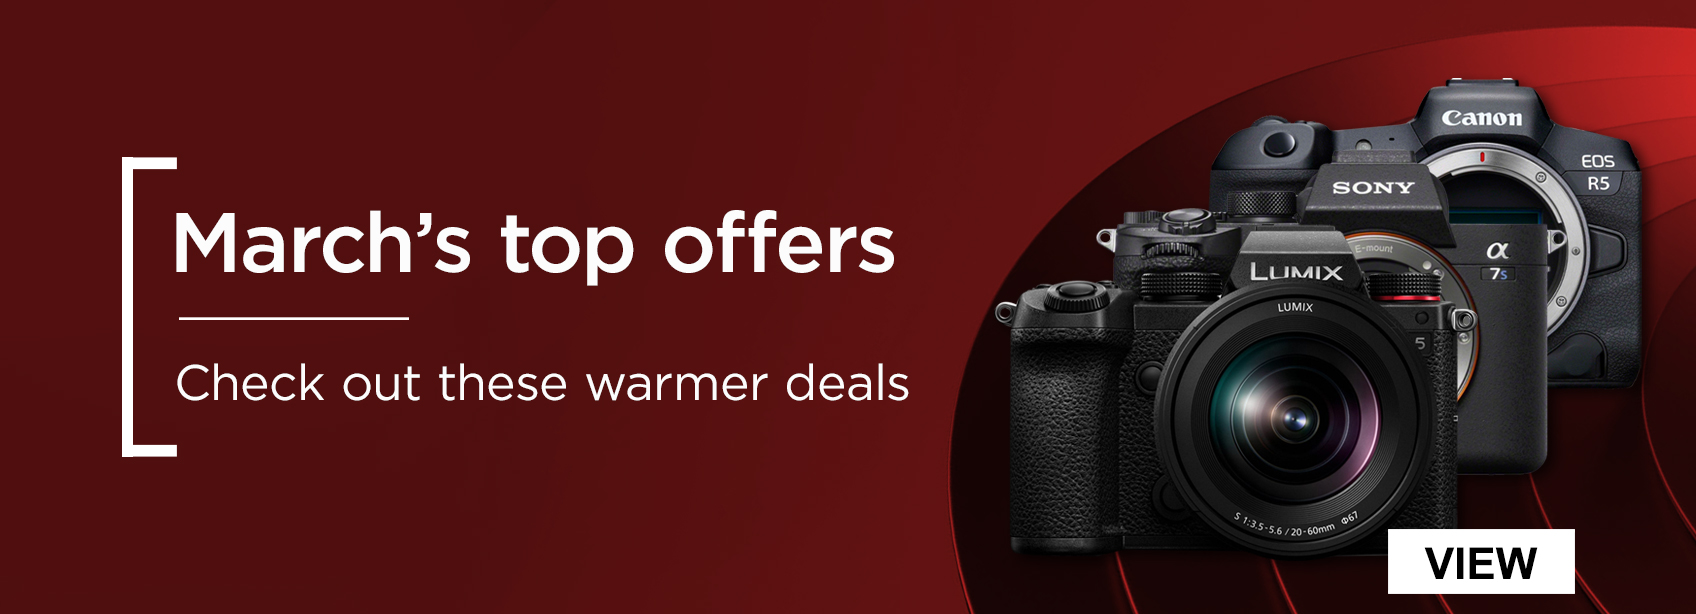 March's top offers. Check out these warmer deals.